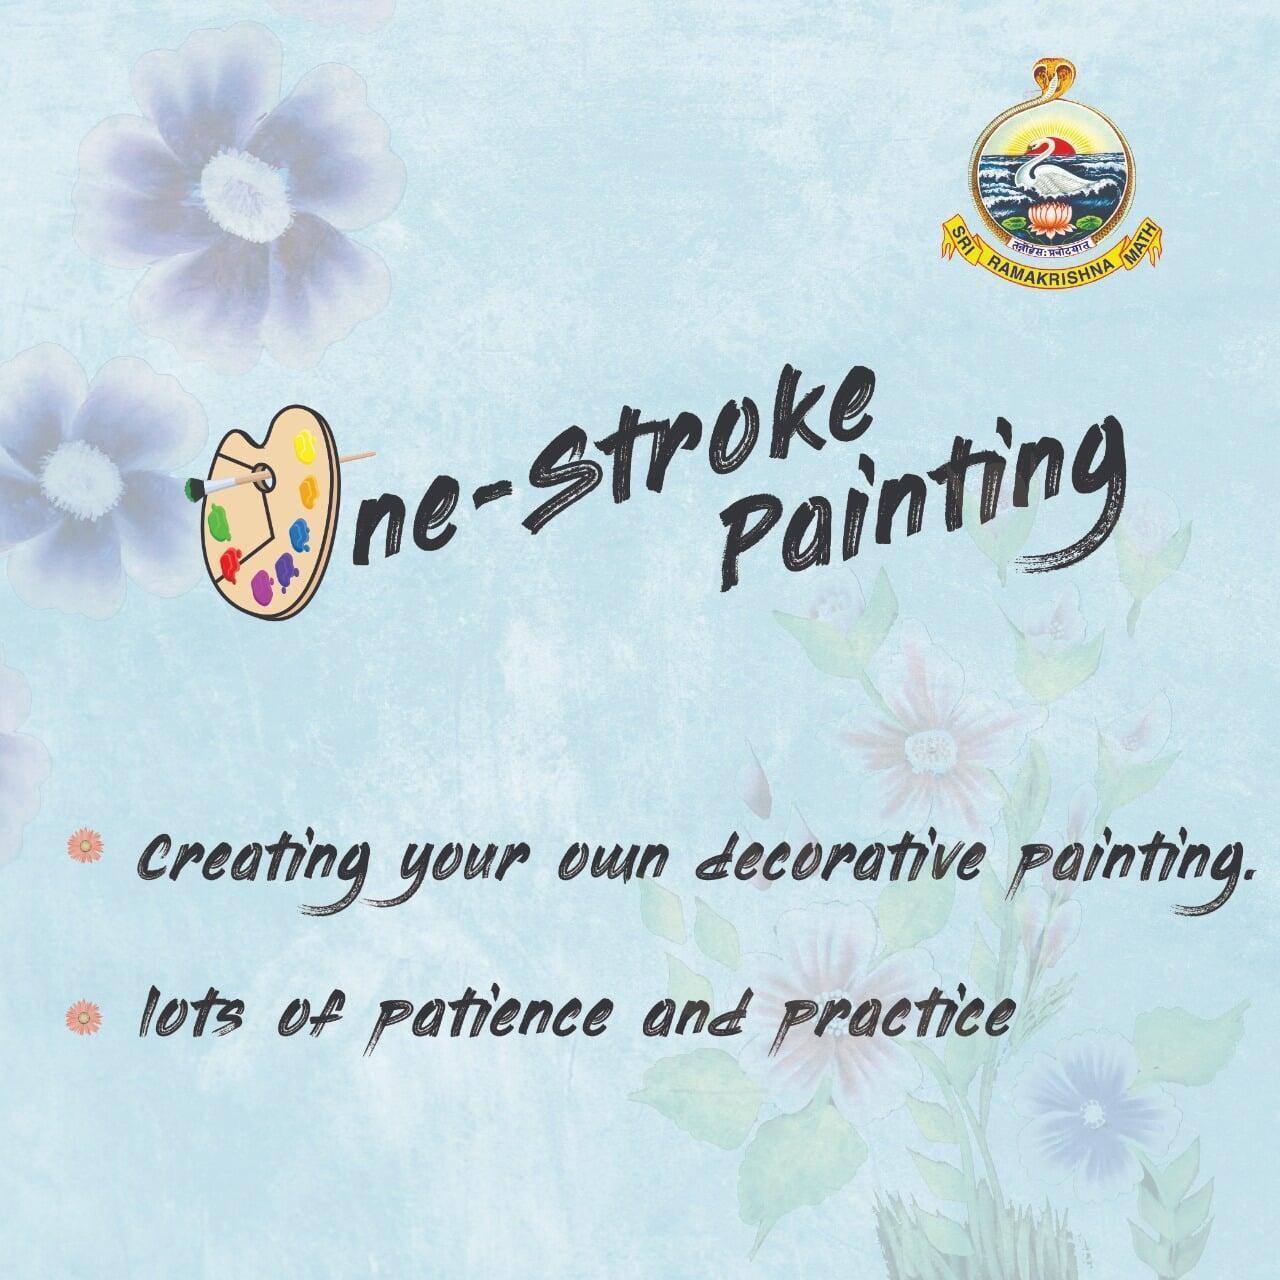 Orientation Session of the 1st batch of One-Stroke Painting Course